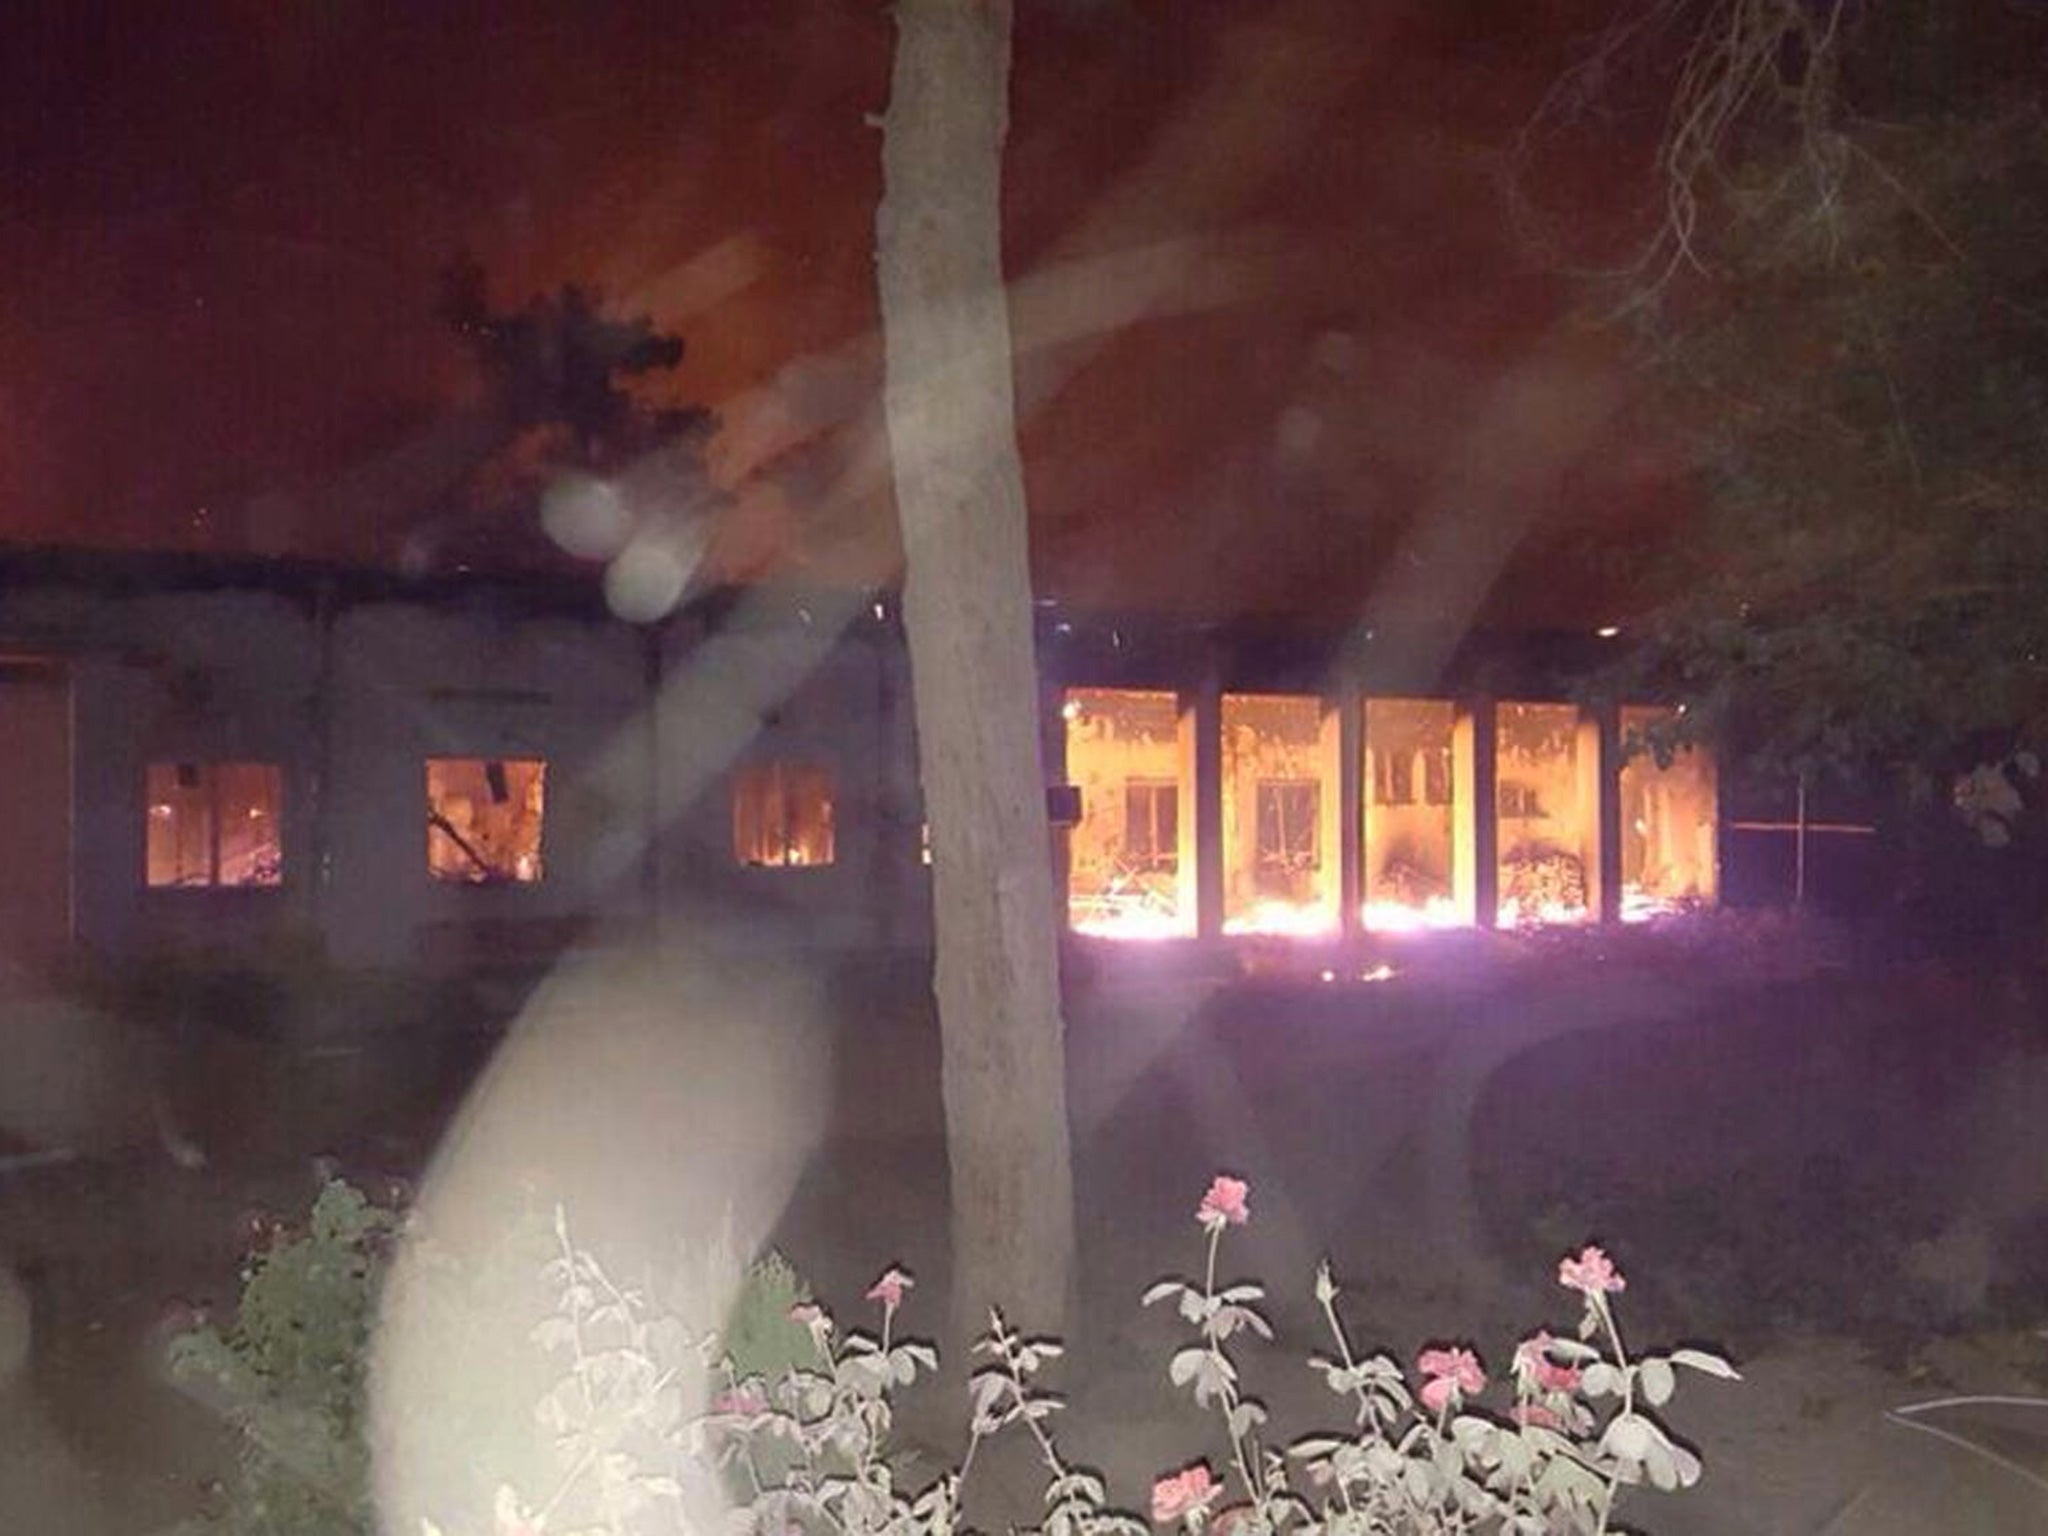 The Doctors Without Borders hospital in flames following the airstrike